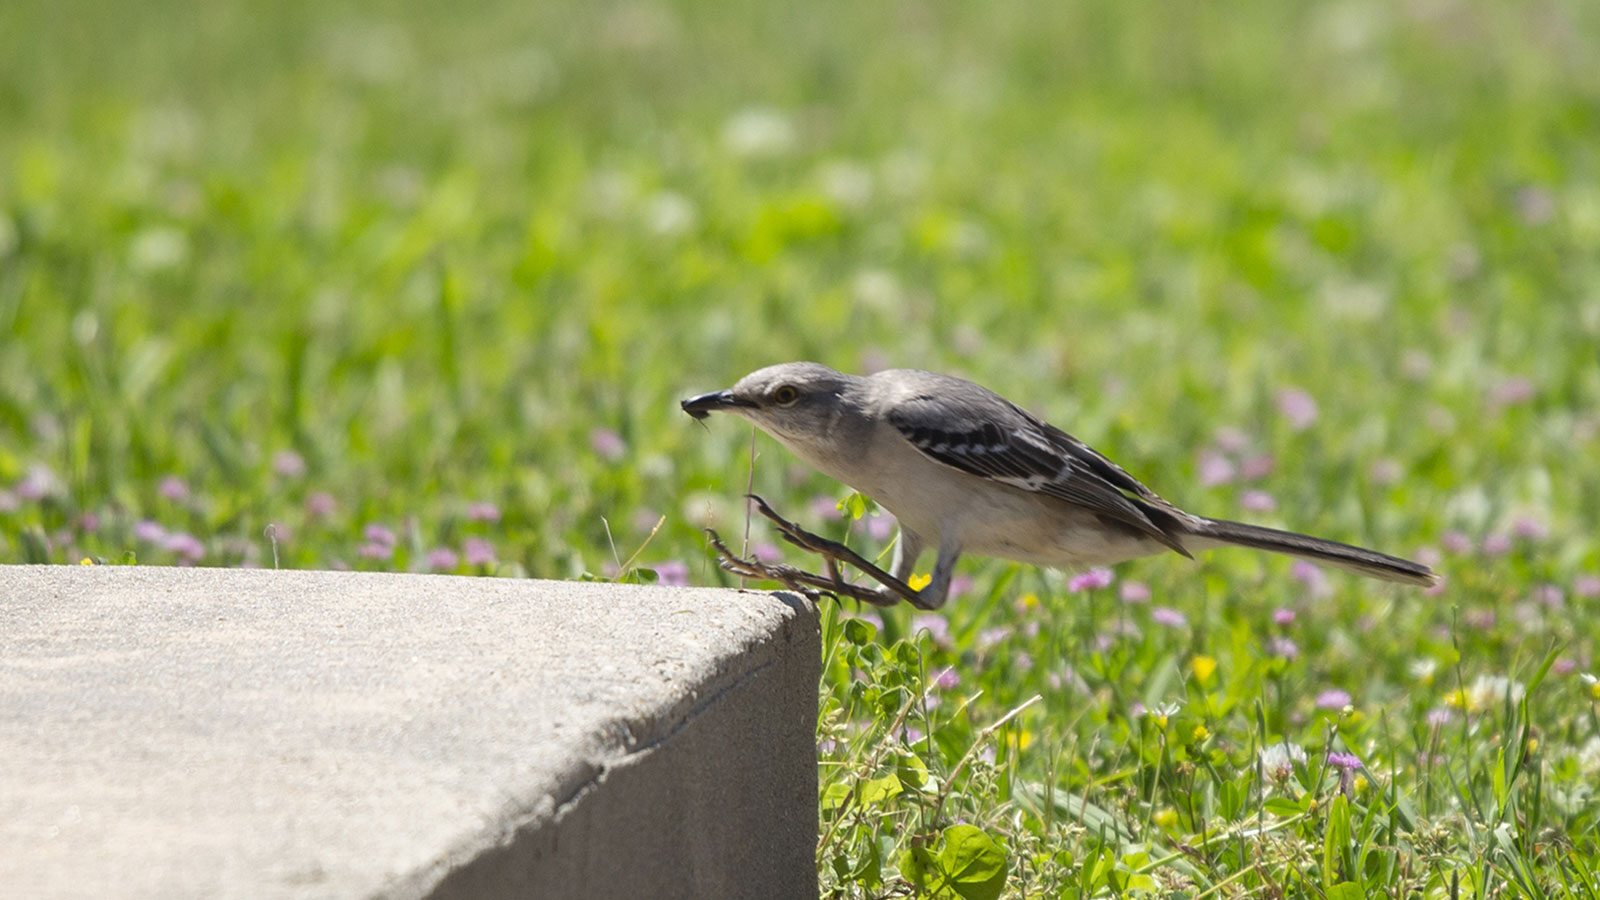 Northern mockingbird leaping onto a cement slab with a bug in its beak